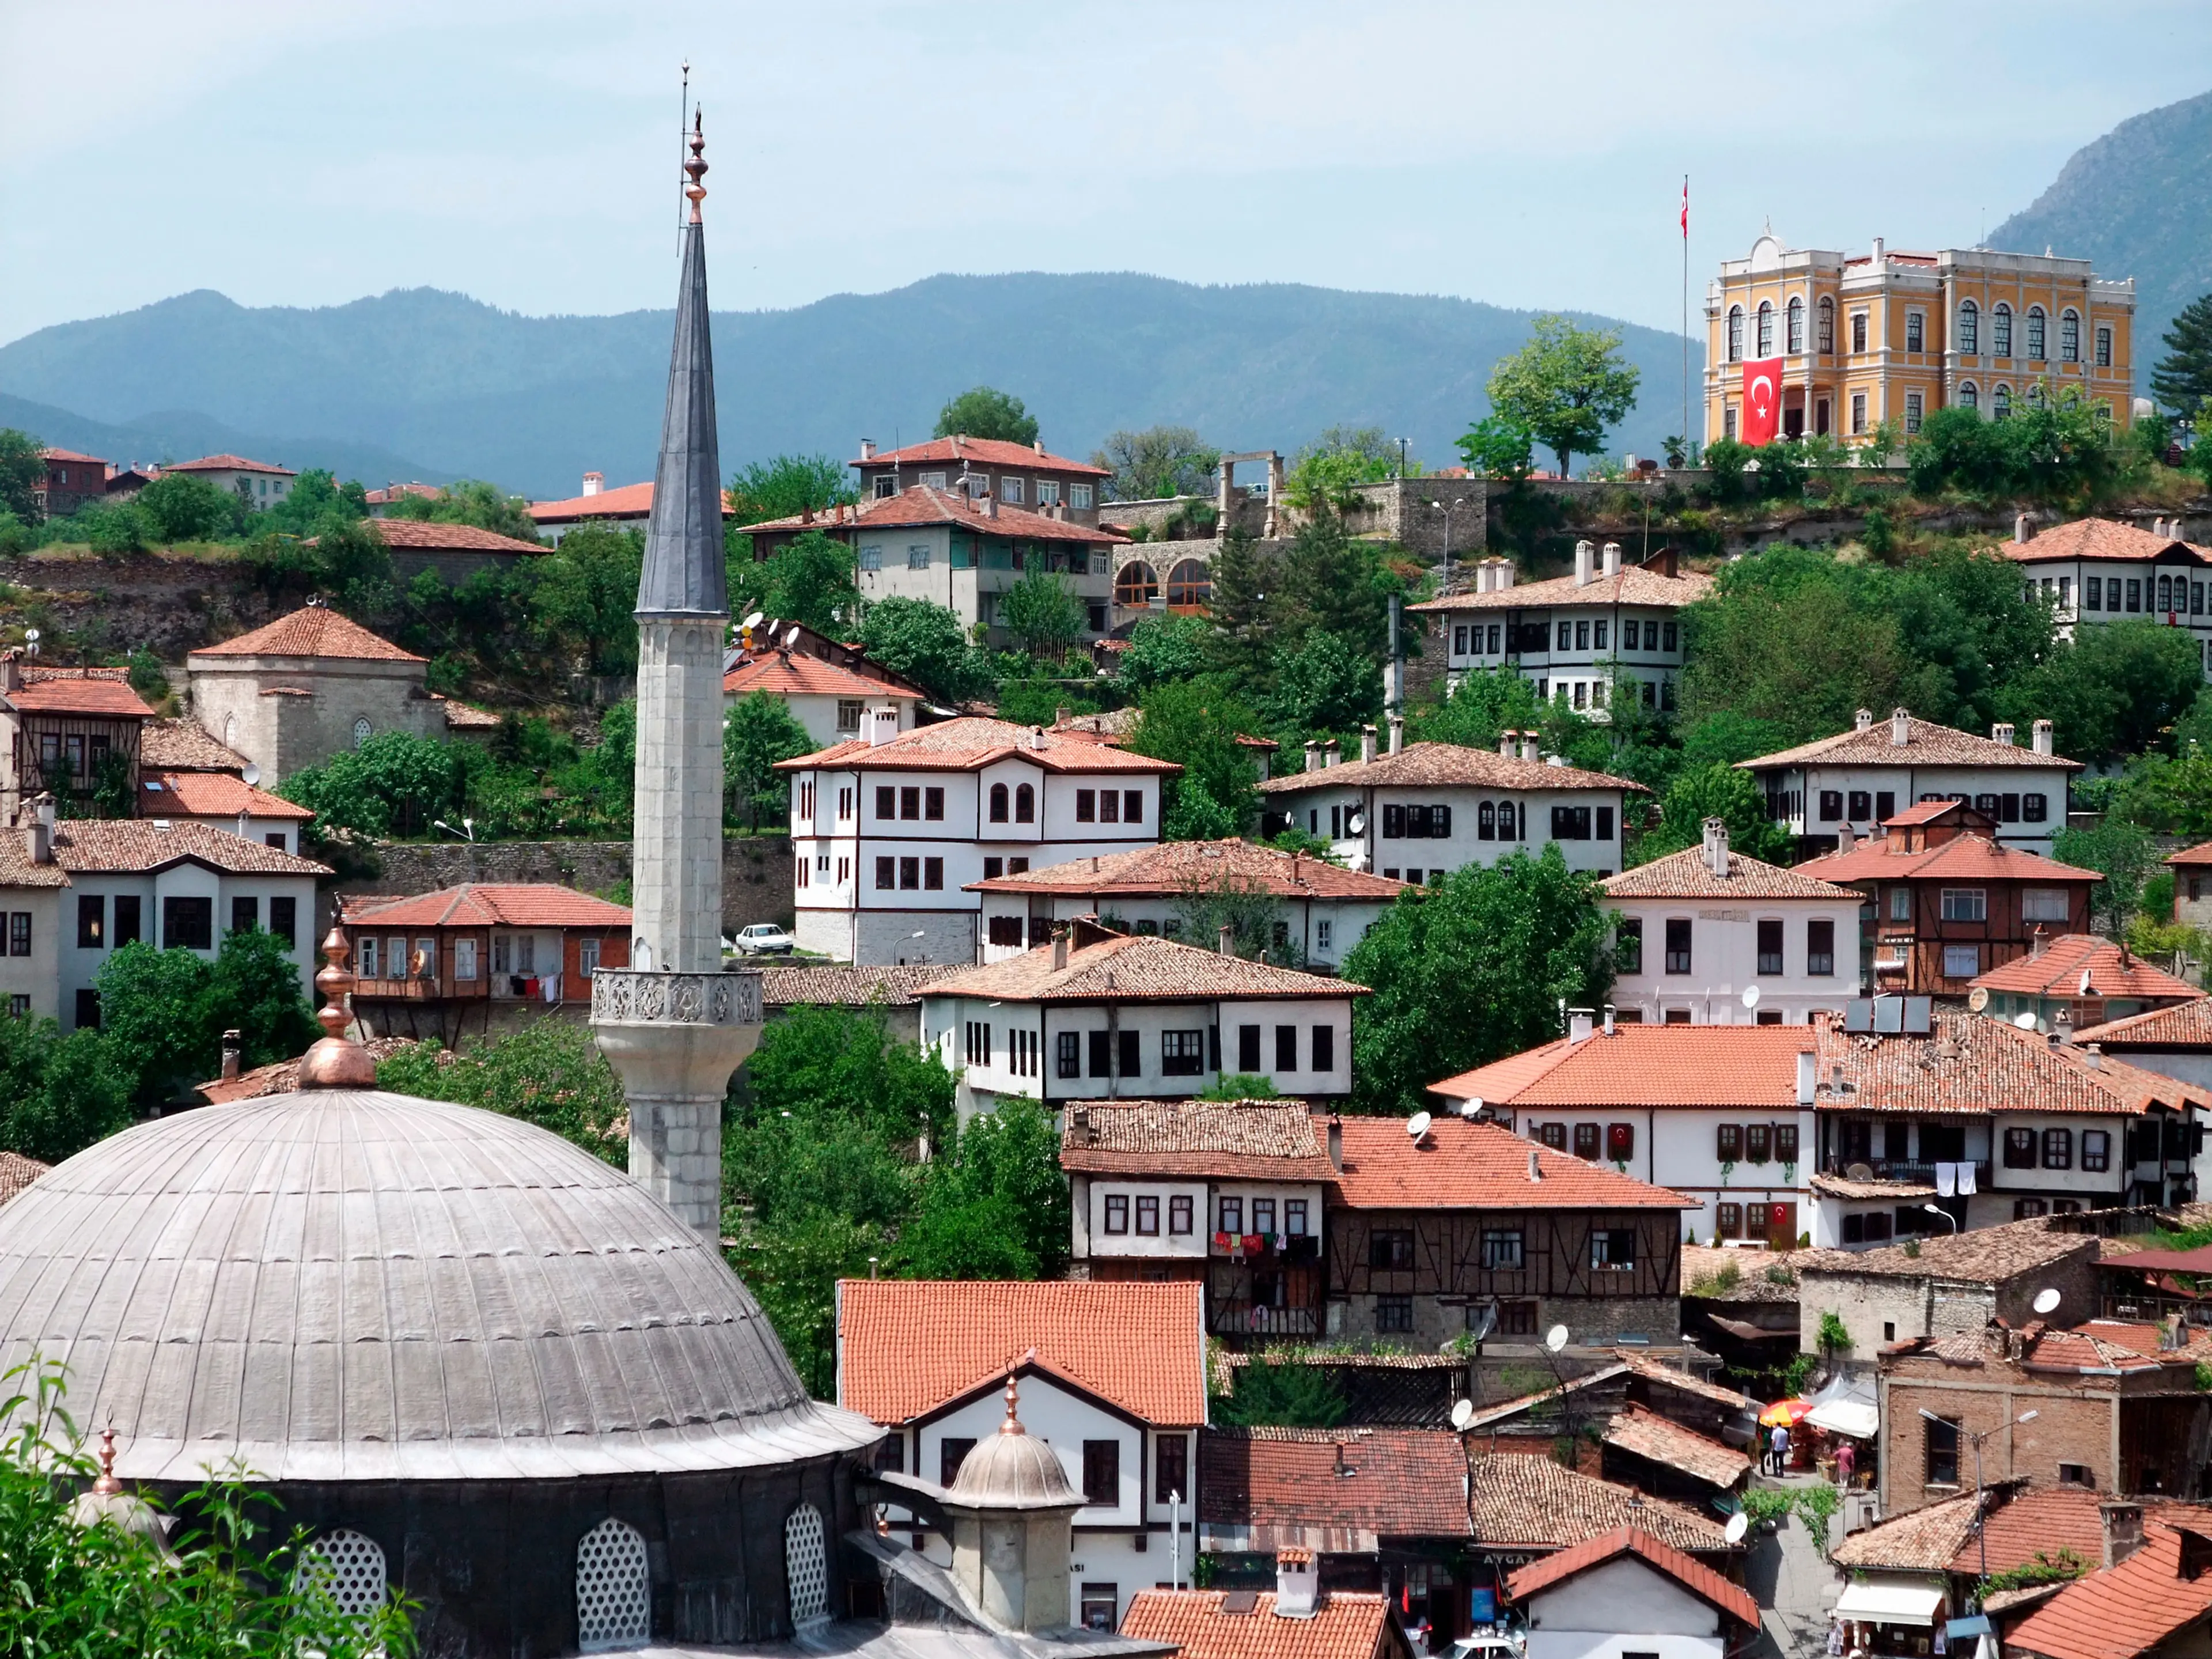 2-Day Family Adventure in Safranbolu: Food, Wine, and Outdoor Fun